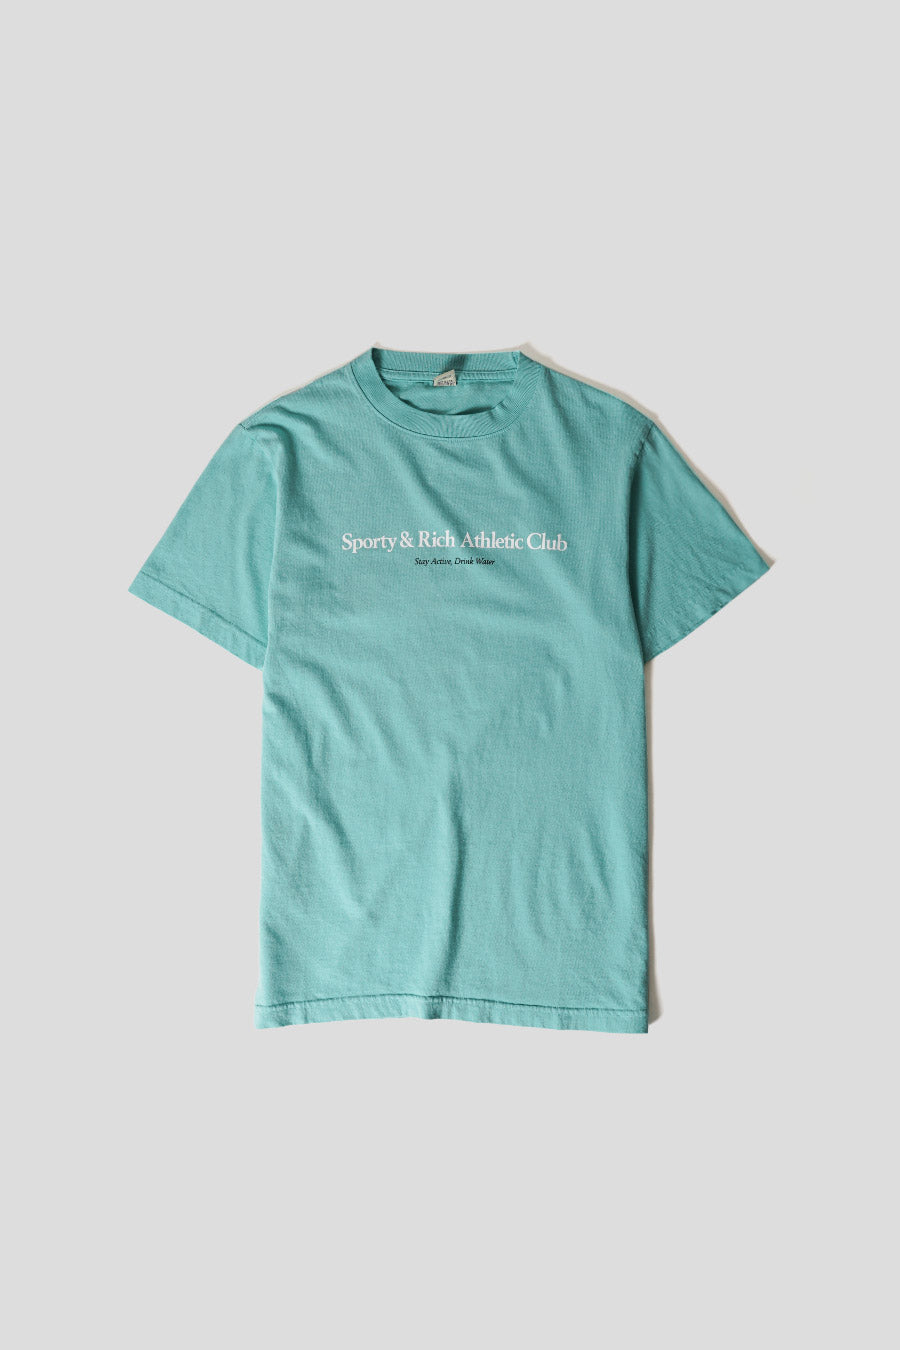 Sporty & Rich - ATHLETIC CLUB TURQUOISE T-SHIRT - LE LABO STORE